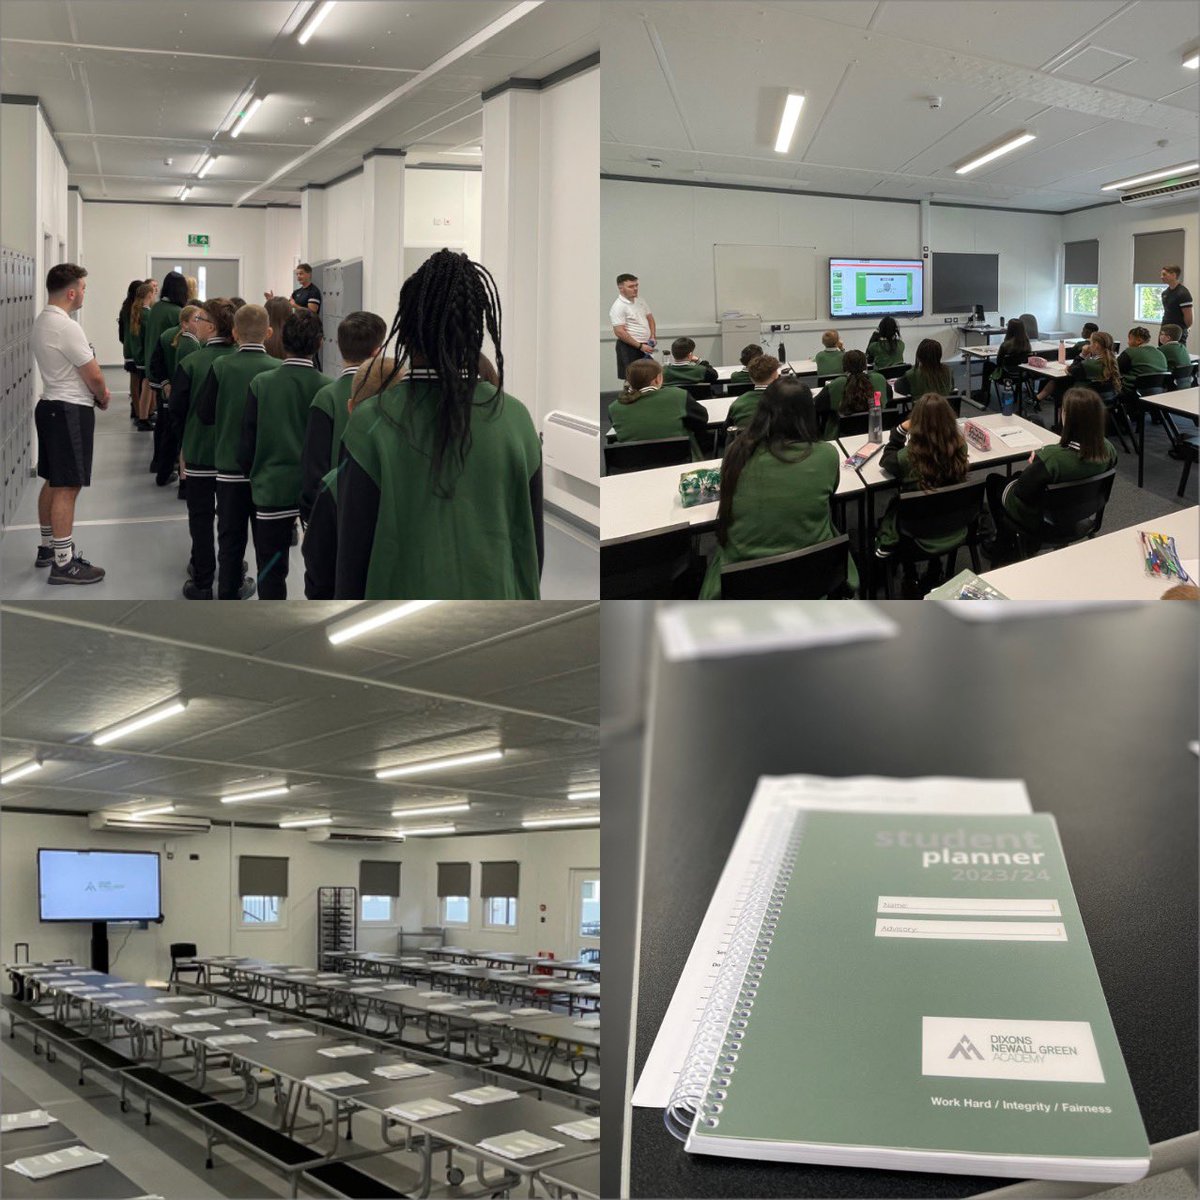 A fantastic start today from our very first cohort @DixonsNGA. Our students demonstrated what it takes to climb their mountain. Staff expertly delivered induction sessions and deliberate practice. #practicemakespermanent